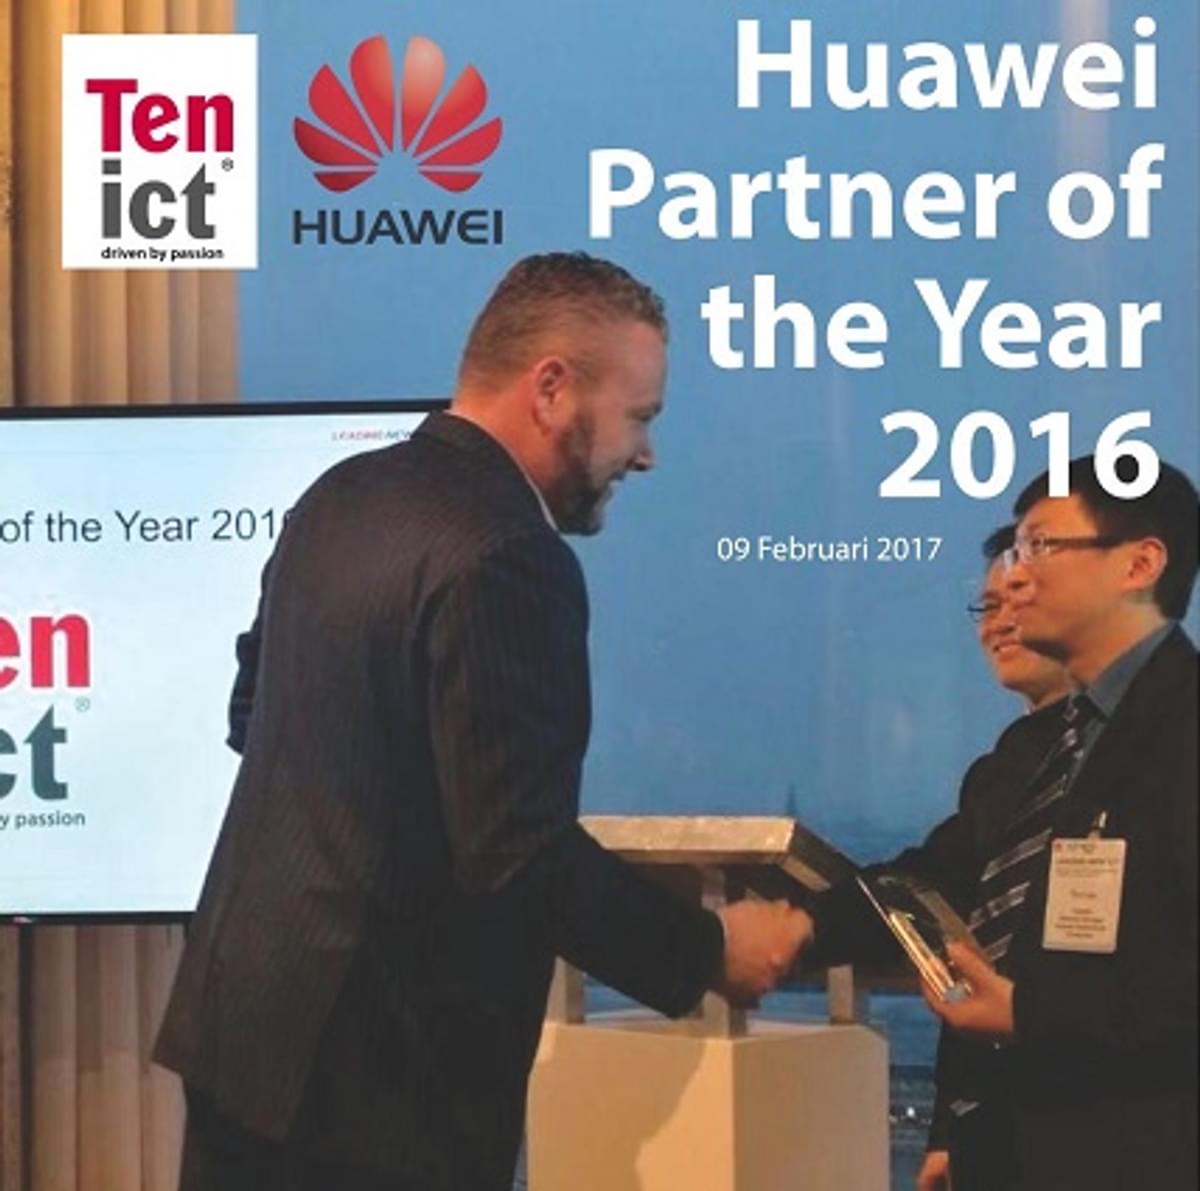 TenICT is Huawei Partner of the Year 2016 image